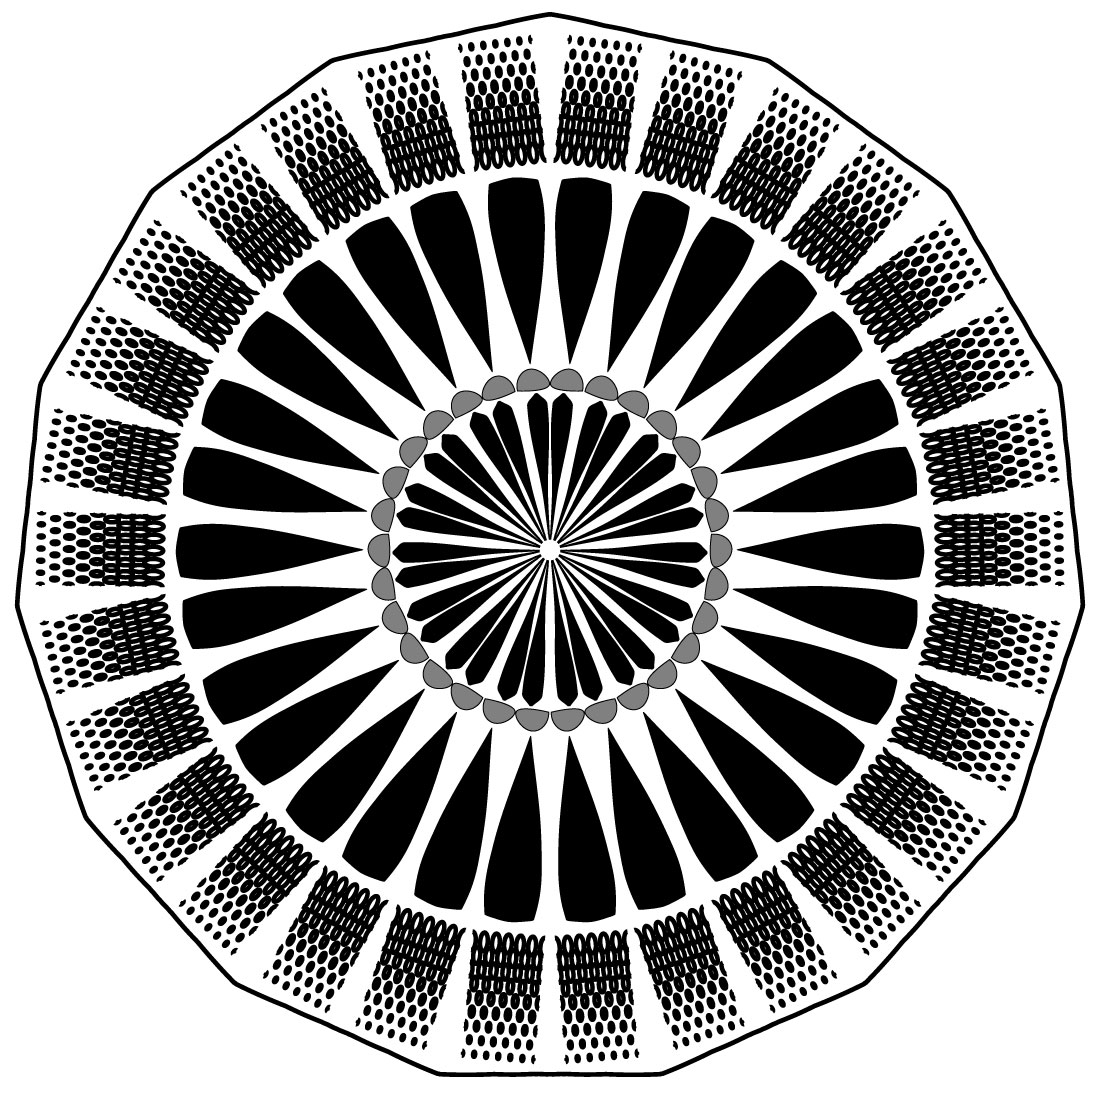 Mandala-Art-with-Rounded-mesh-in-black-and-white cover image.